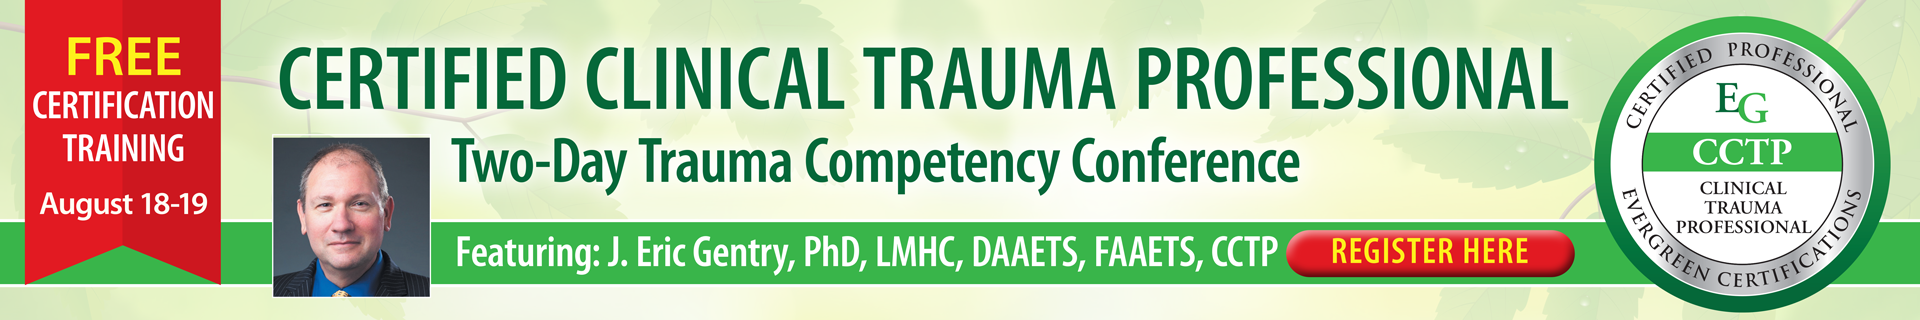 FREE 3-day Certified Clinical Trauma Professional (CCTP): Two-Day Trauma Competency Conference